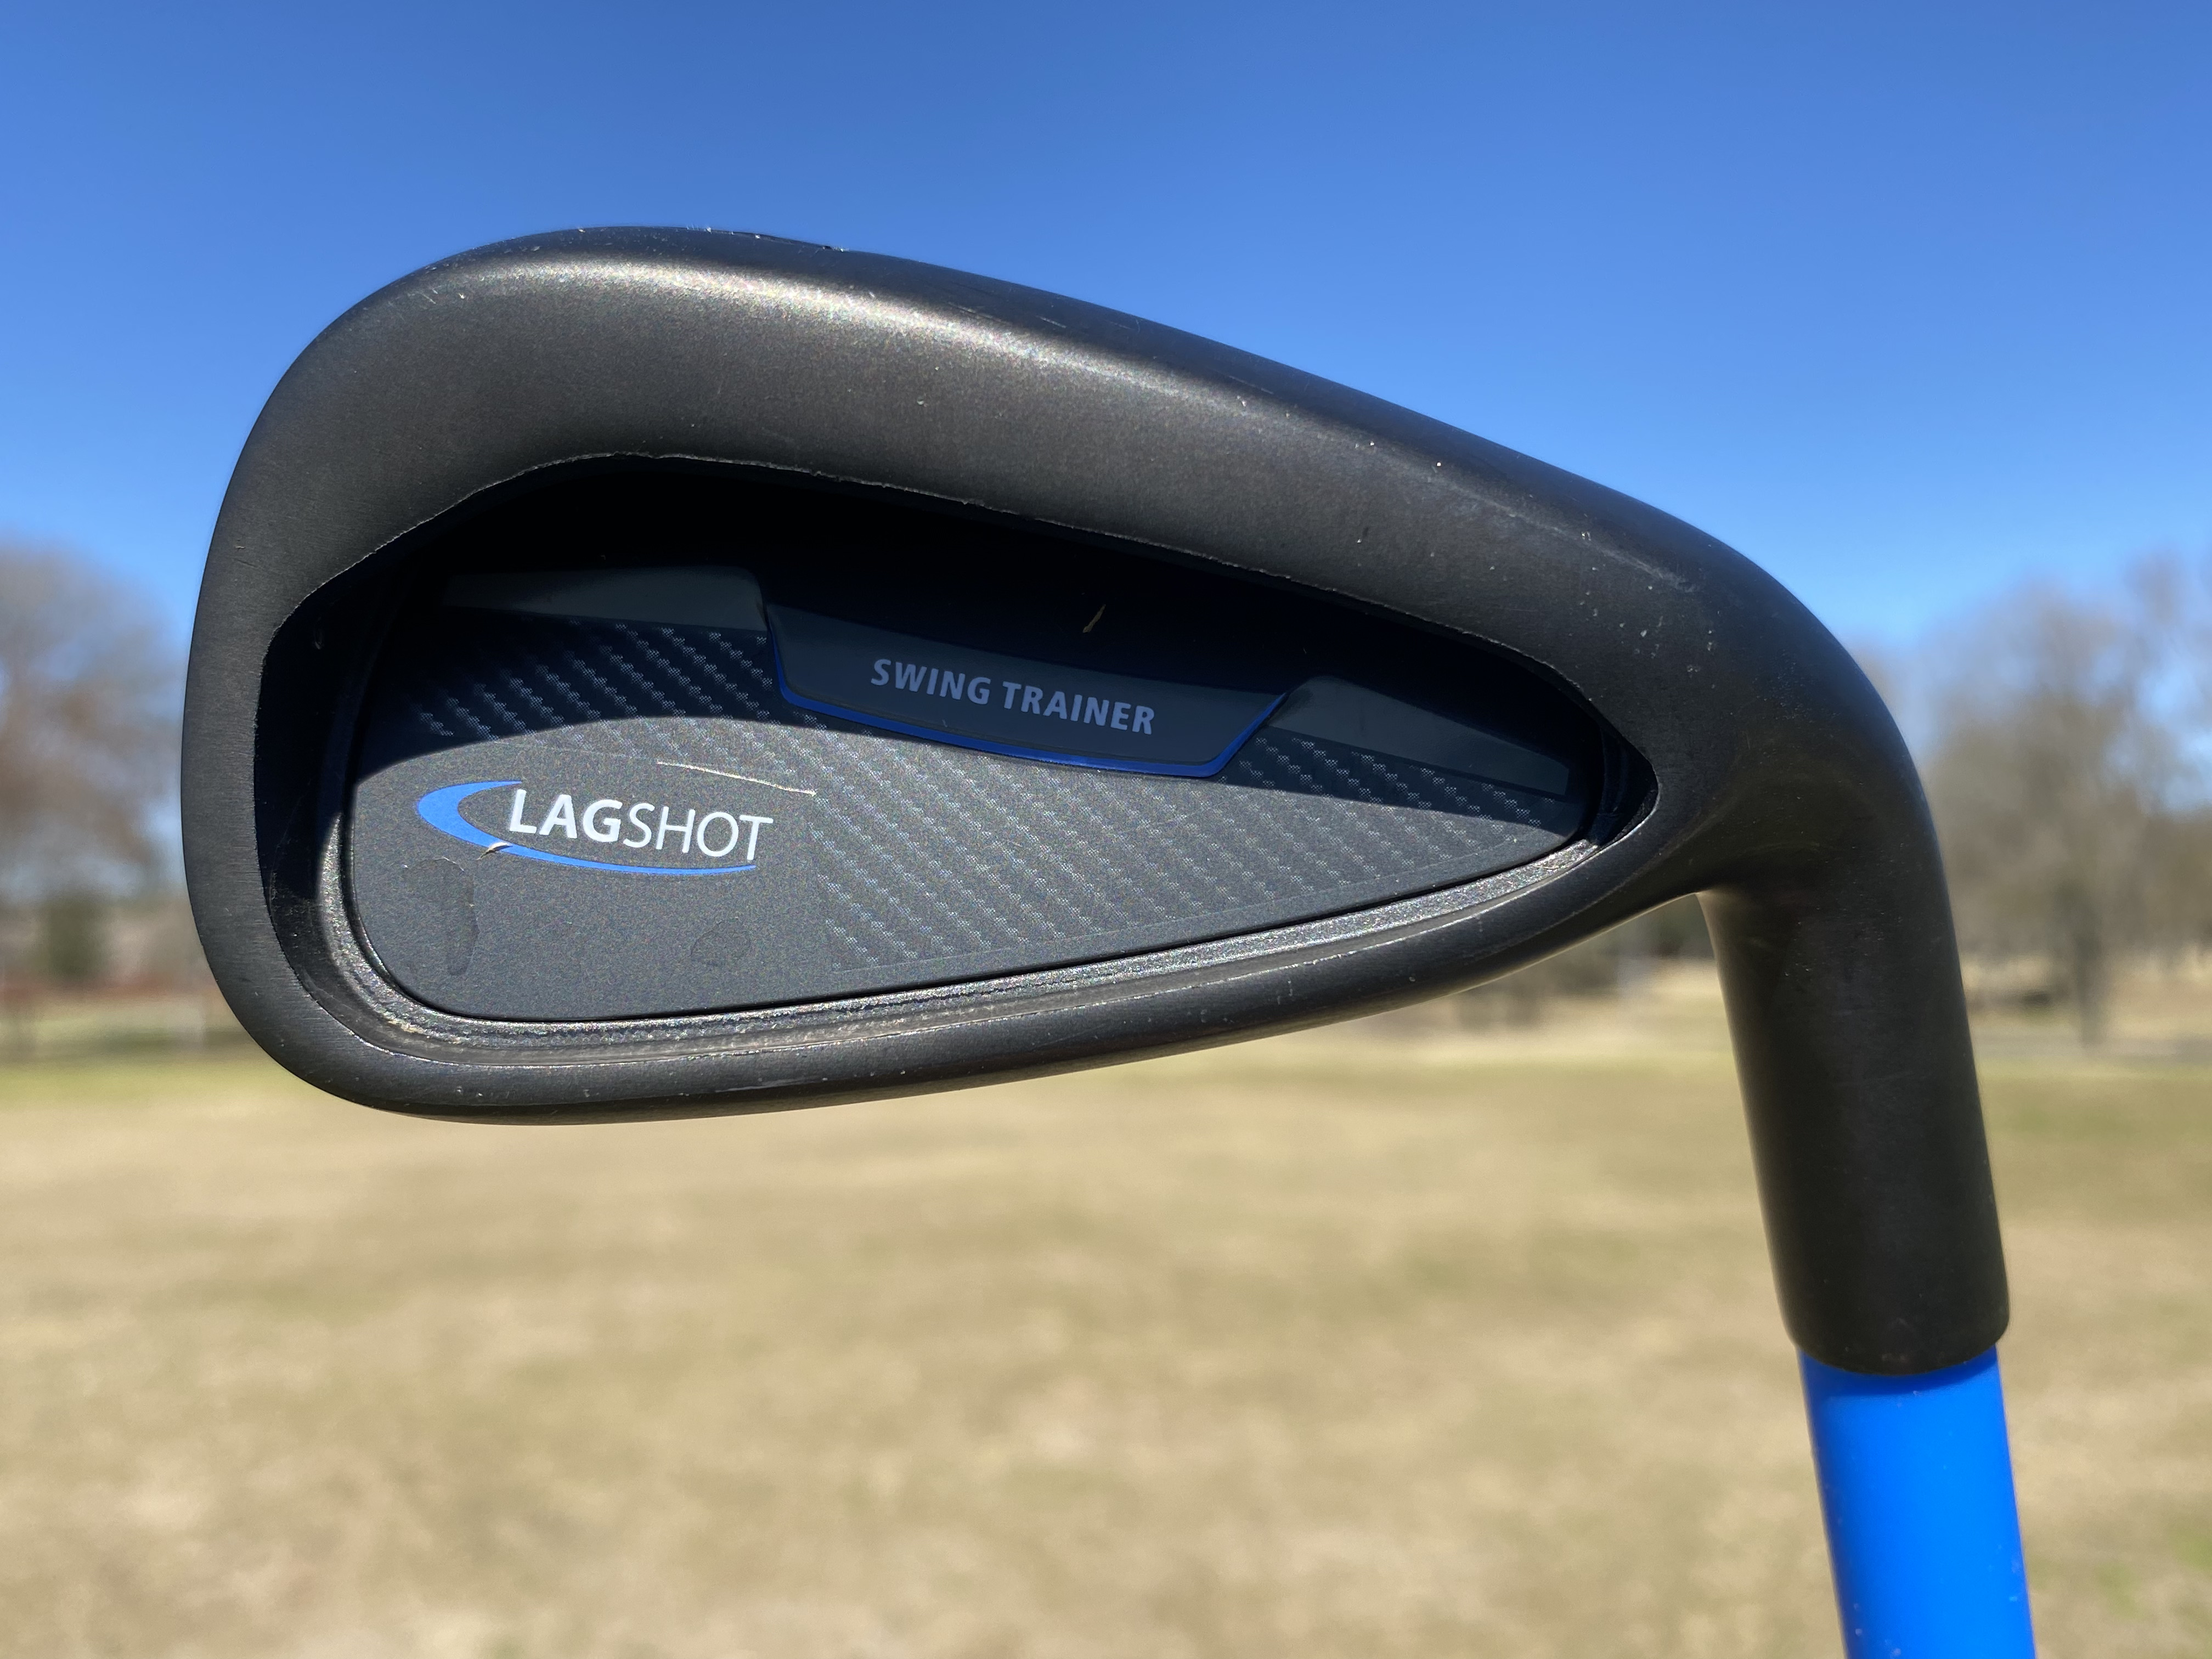 Lag Shot 7 Iron Golf Swing Trainer Review | Golf Monthly